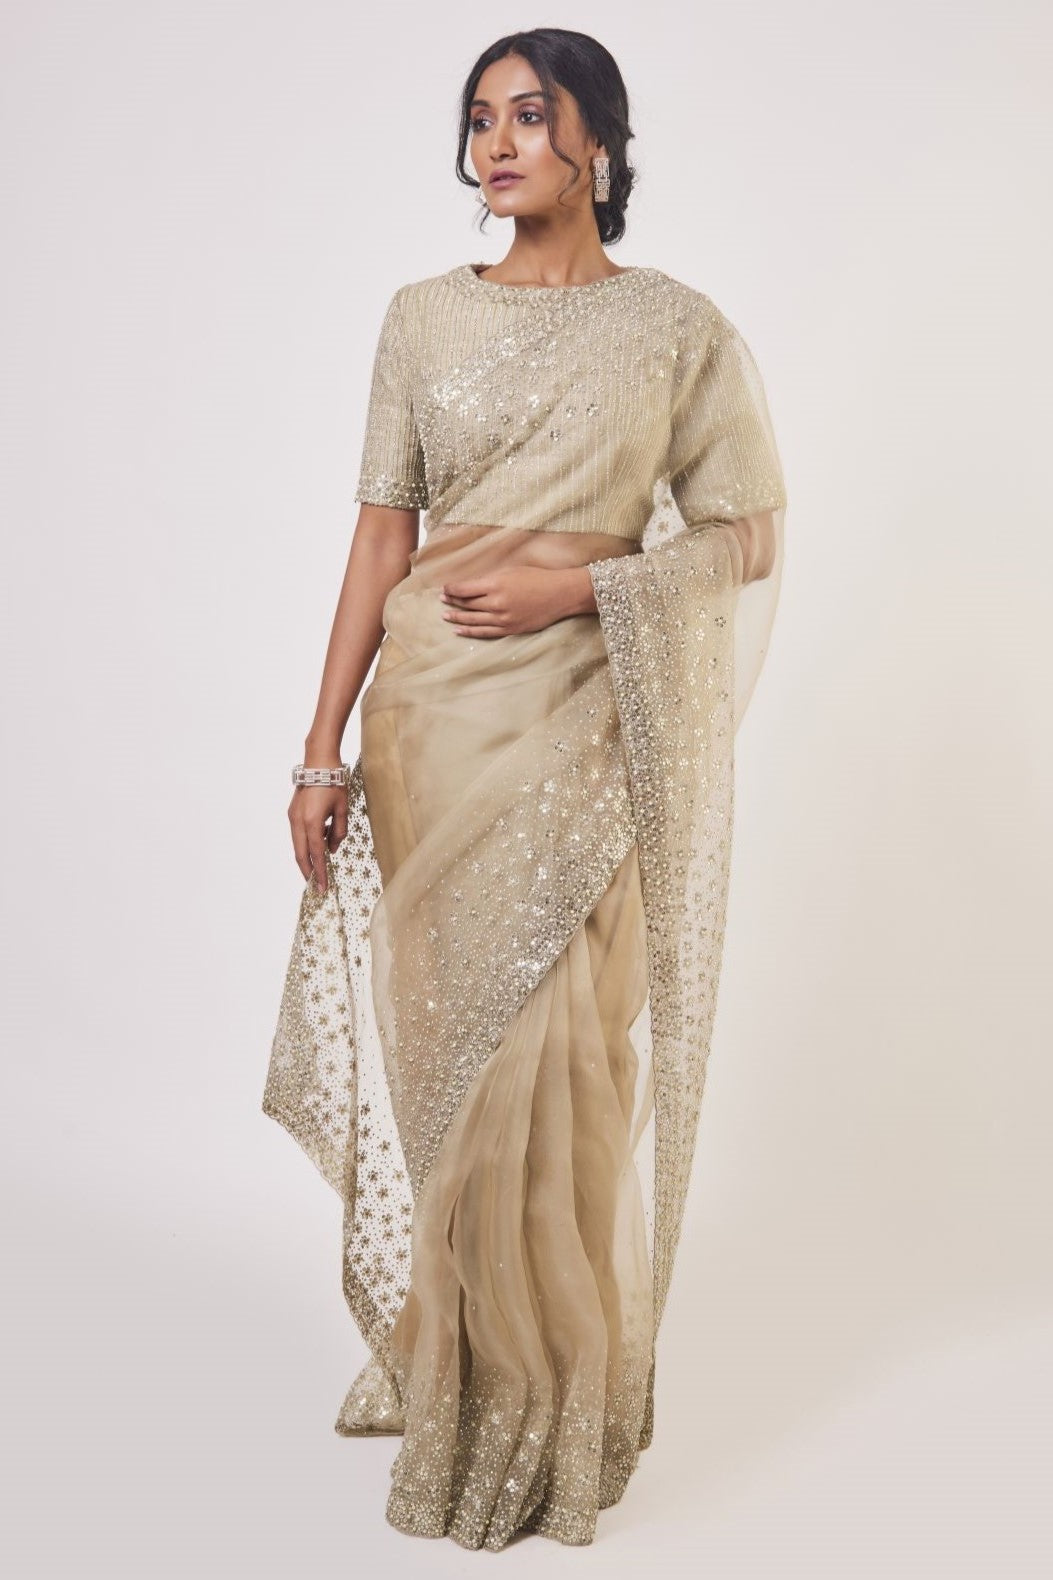 Buy beige embroidered organza saree online in USA with embroidered saree blouse. Make a fashion statement on festive occasions and weddings with designer sarees, designer suits, Indian dresses, Anarkali suits, palazzo suits, designer gowns, sharara suits, embroidered sarees from Pure Elegance Indian fashion store in USA.-full view